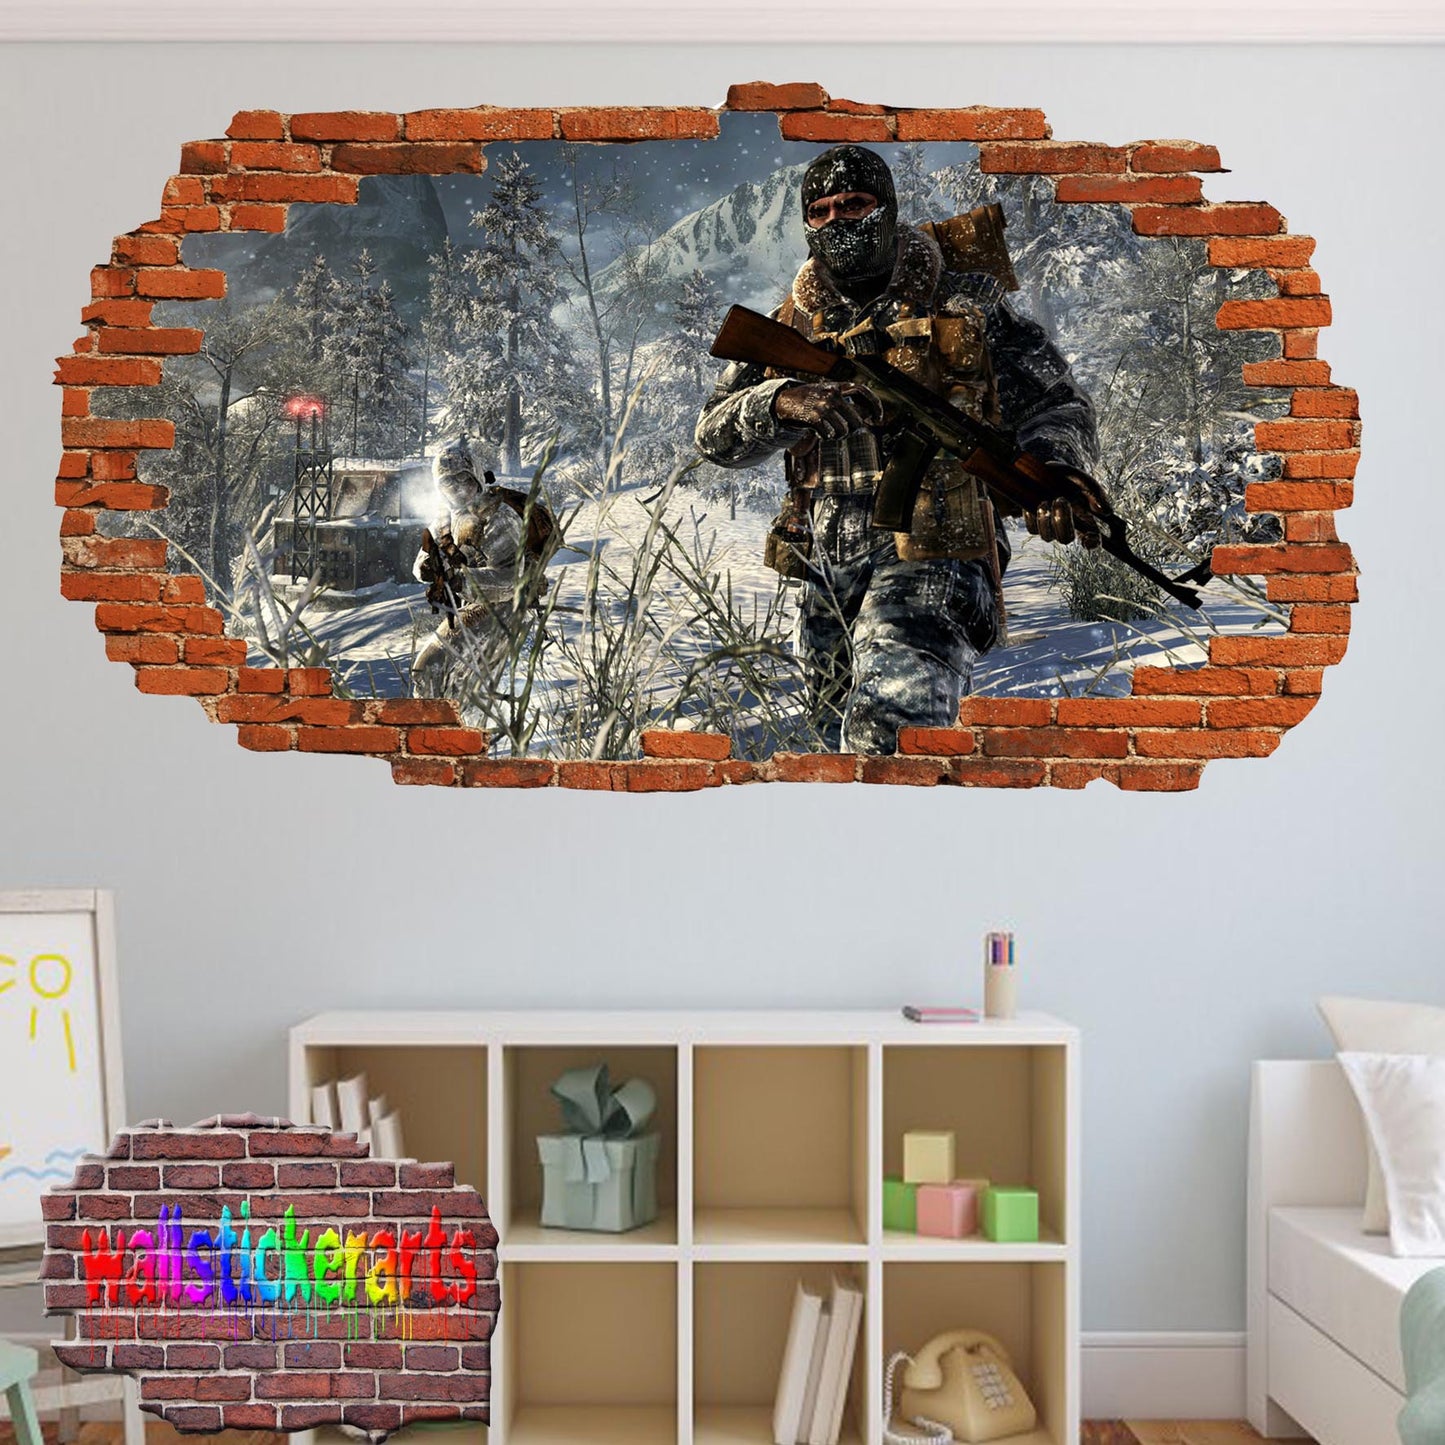 Cod Soldiers War 3d Smashed Wall Sticker Room Decoration Decal Mural